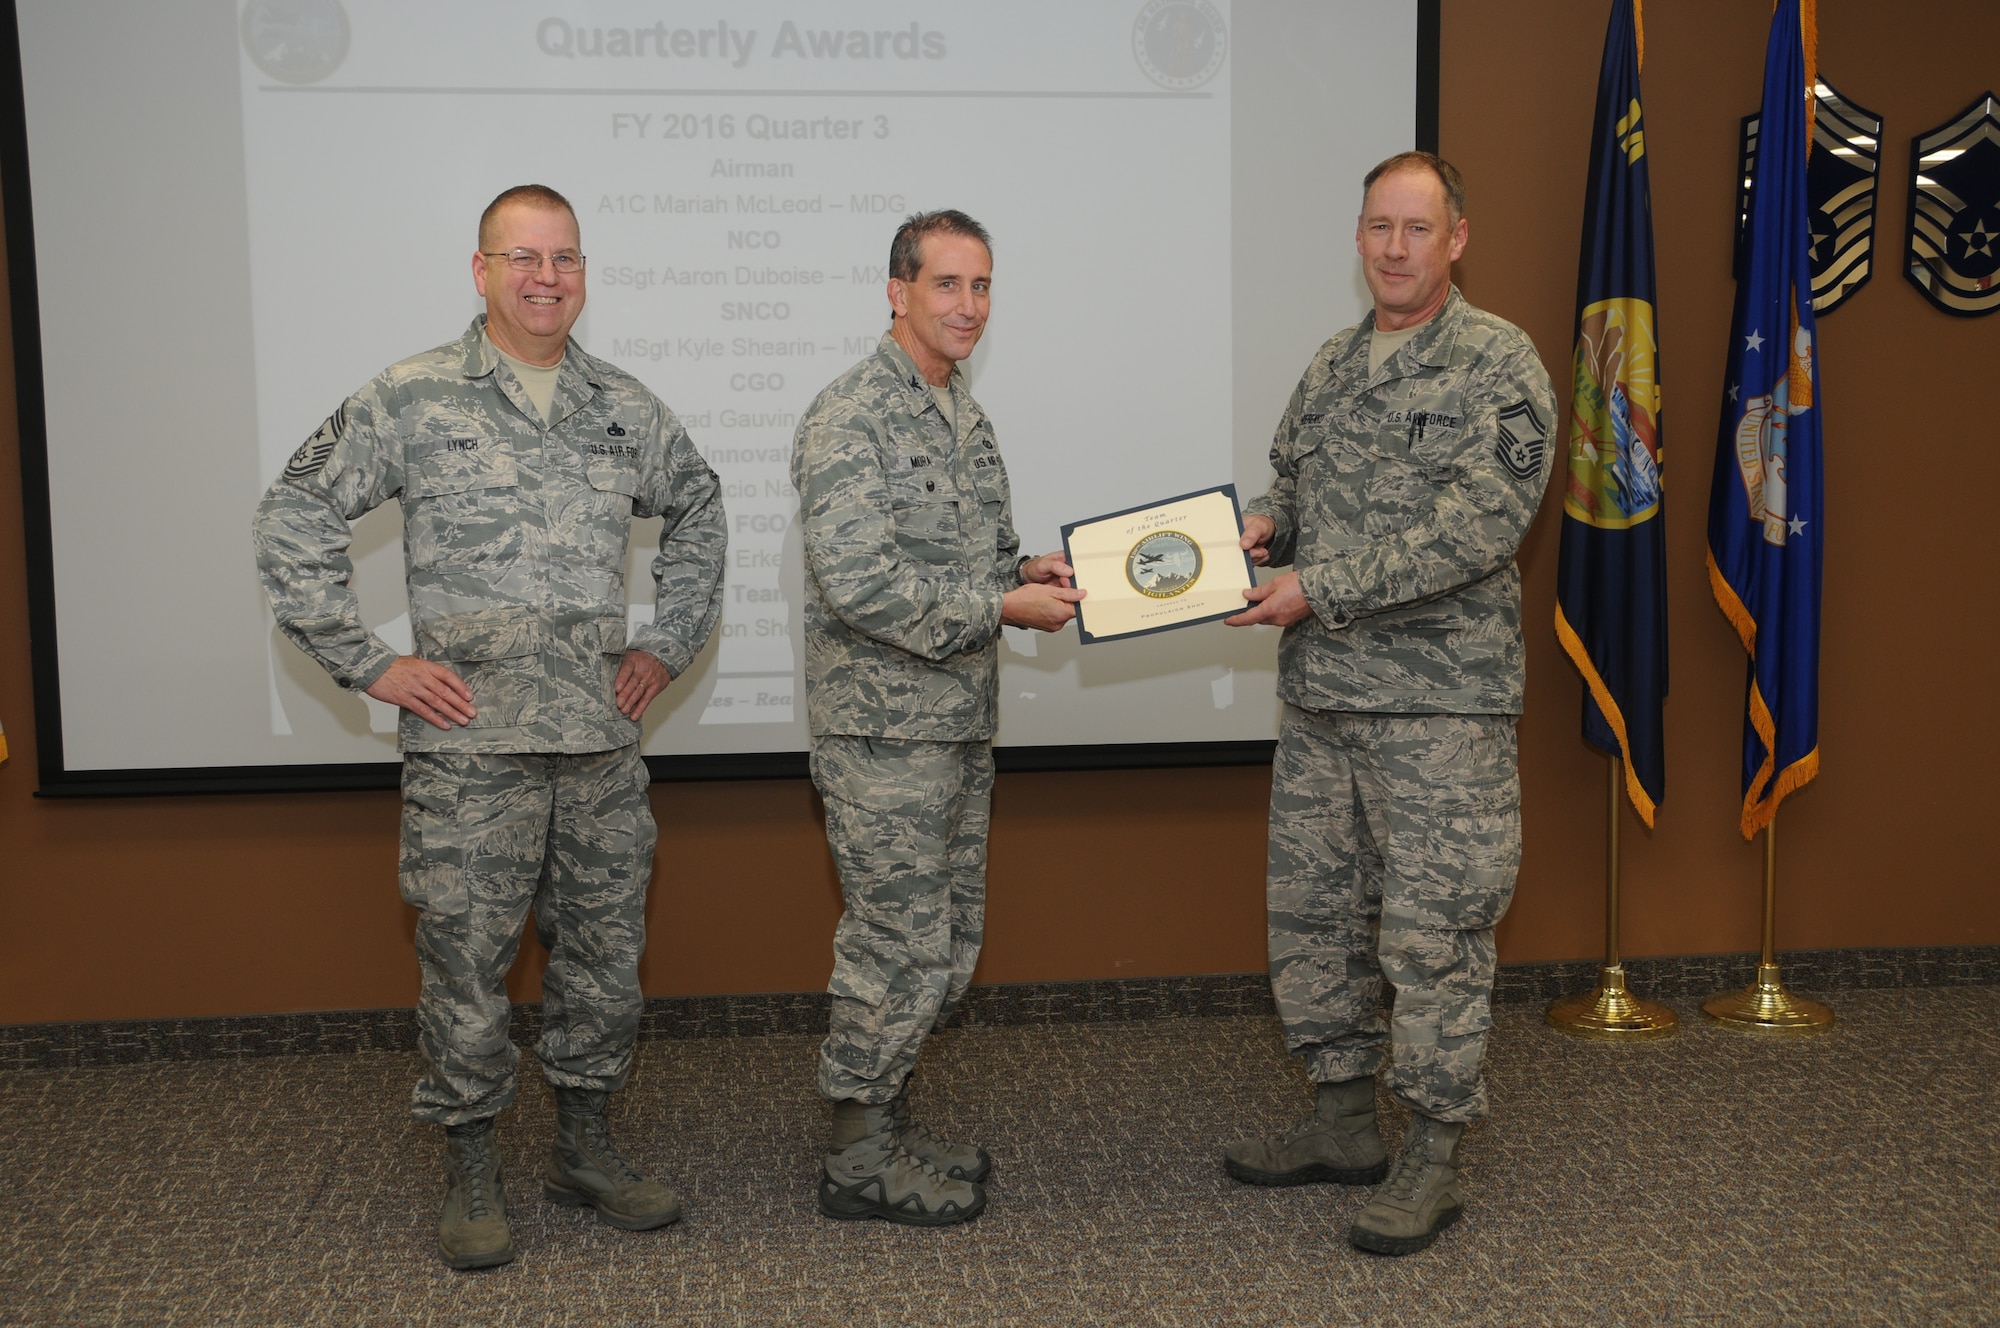 120th Airlift Wing Vice Commander Col. Thomas Mora and 120th AW Command Chief Master Sgt. Steven Lynch presented the Fiscal Year 2016 3rd quarter award winners for the 120th Airlift Wing of the Montana Air National Guard during the Stand-up Briefing held in the Larsen Room of the wing headquarters building Nov. 4, 2016. Senior Master Sgt. Wayne Bonderenko accepted the  Team of the Quarter Award on behalf of the 120th Maintenance Group propulsion shop.